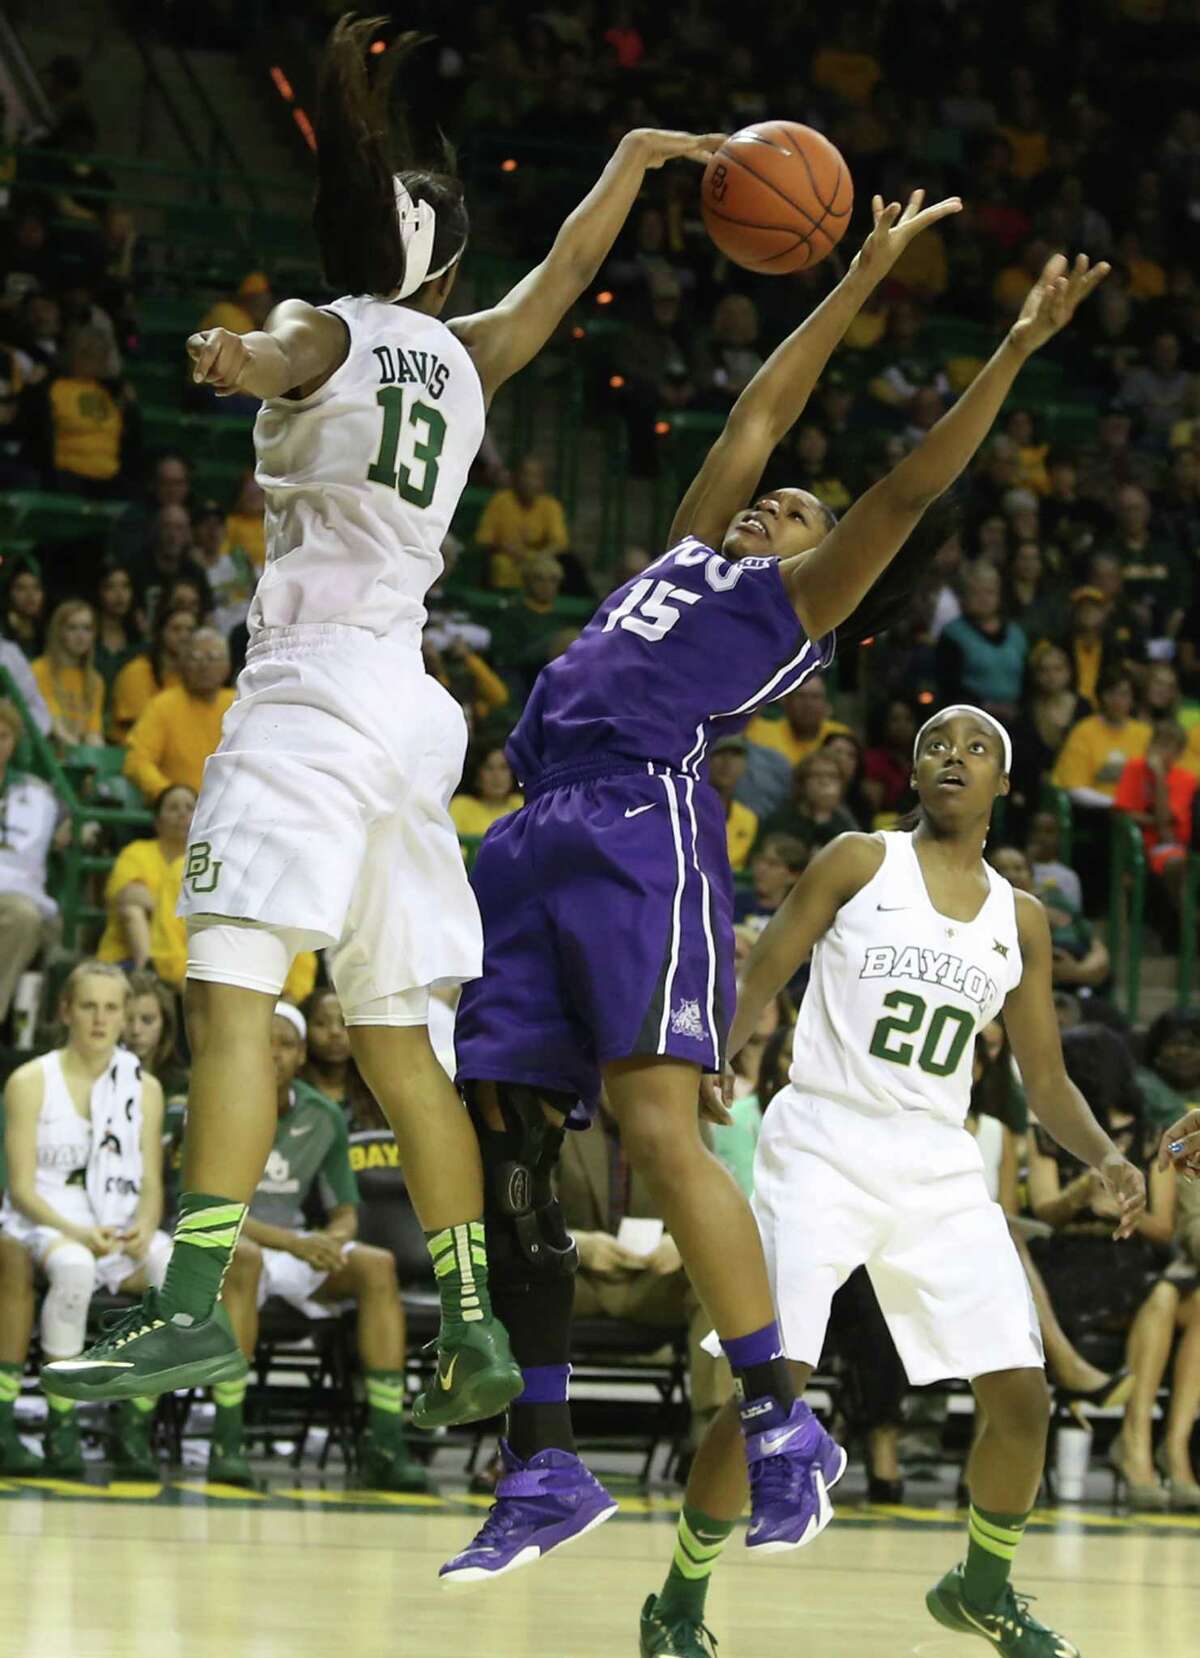 Baylor's Nina Davis (13) blocks the shot of TCU's Jada Butts in the first half - one of nine blocked shots by the No. 3 Lady Bears in their 91-75 victory.